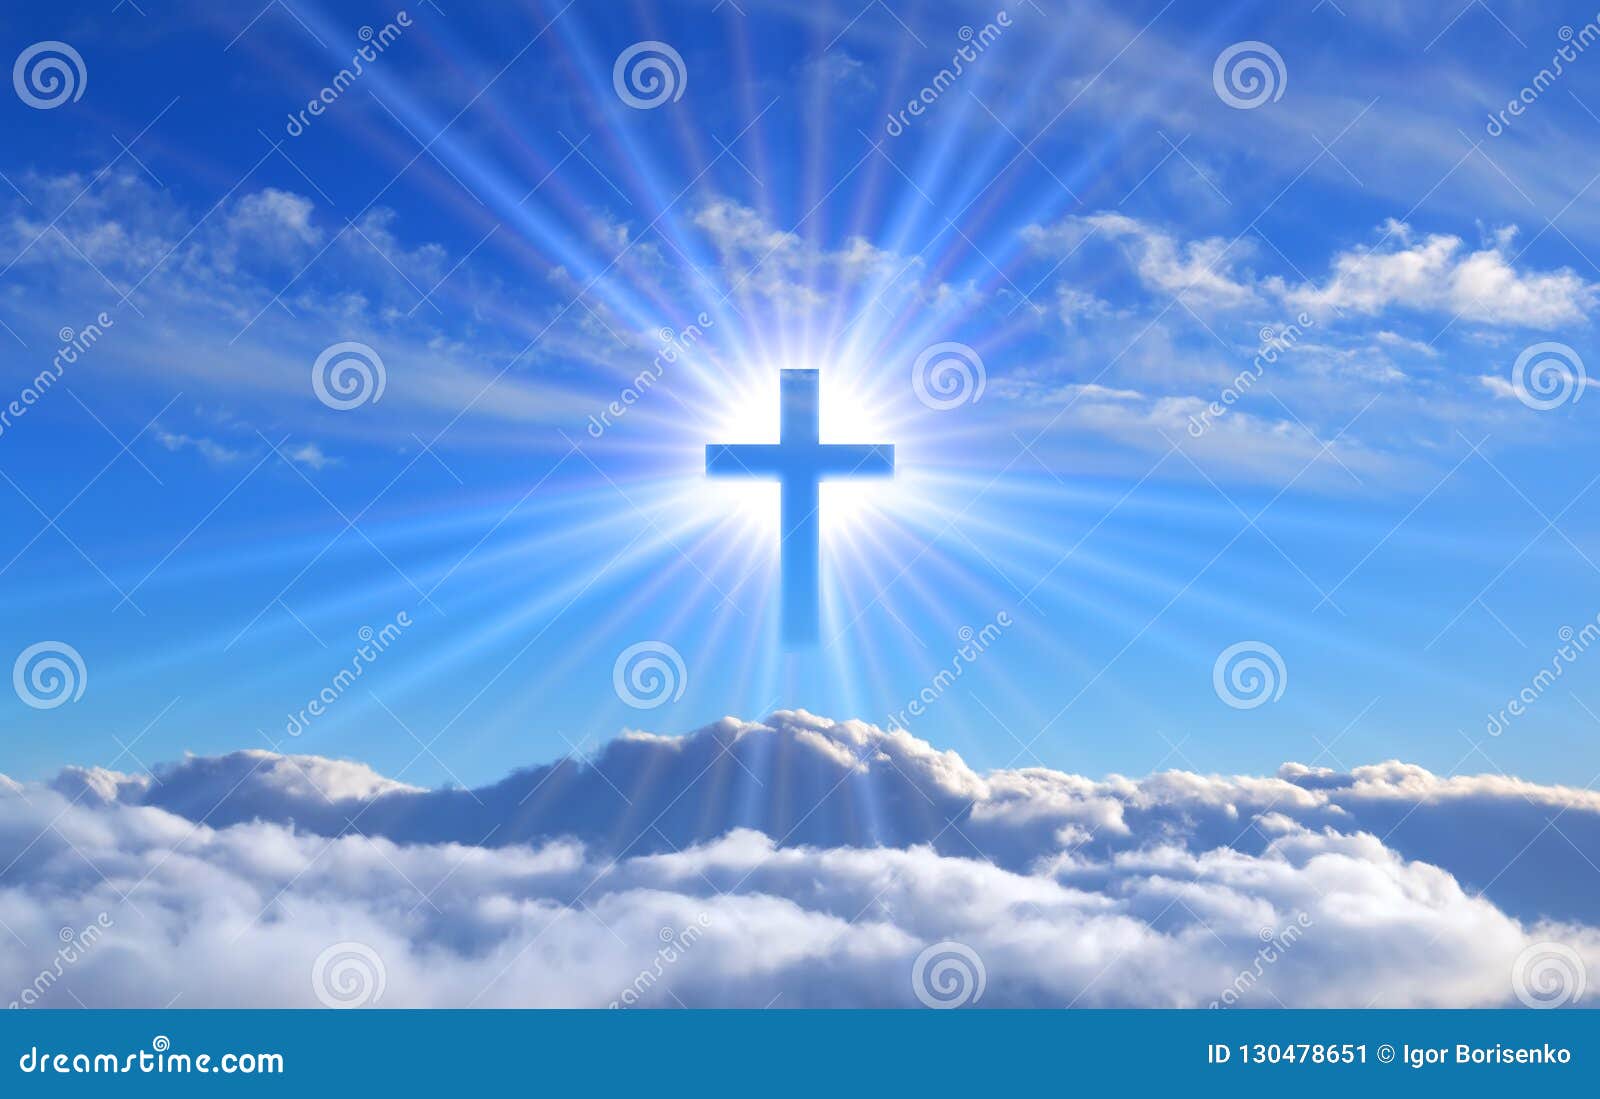 religious cross over cumulus clouds illuminated by the rays of holy radiance, concept.